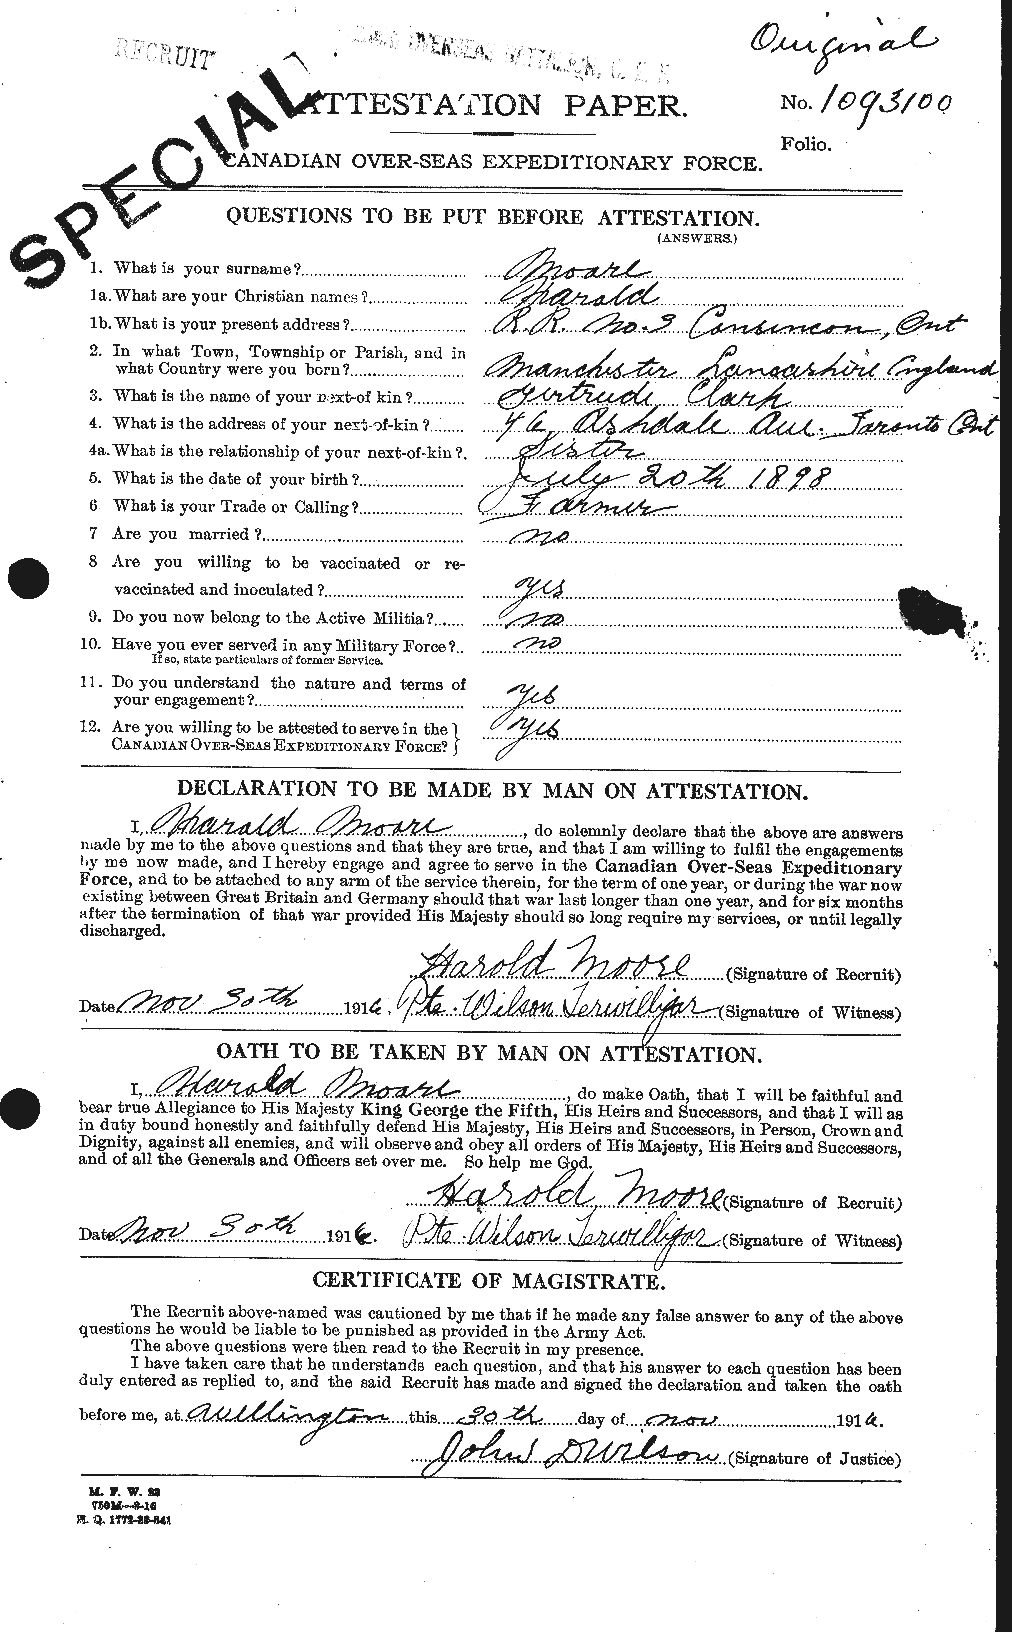 Personnel Records of the First World War - CEF 502054a